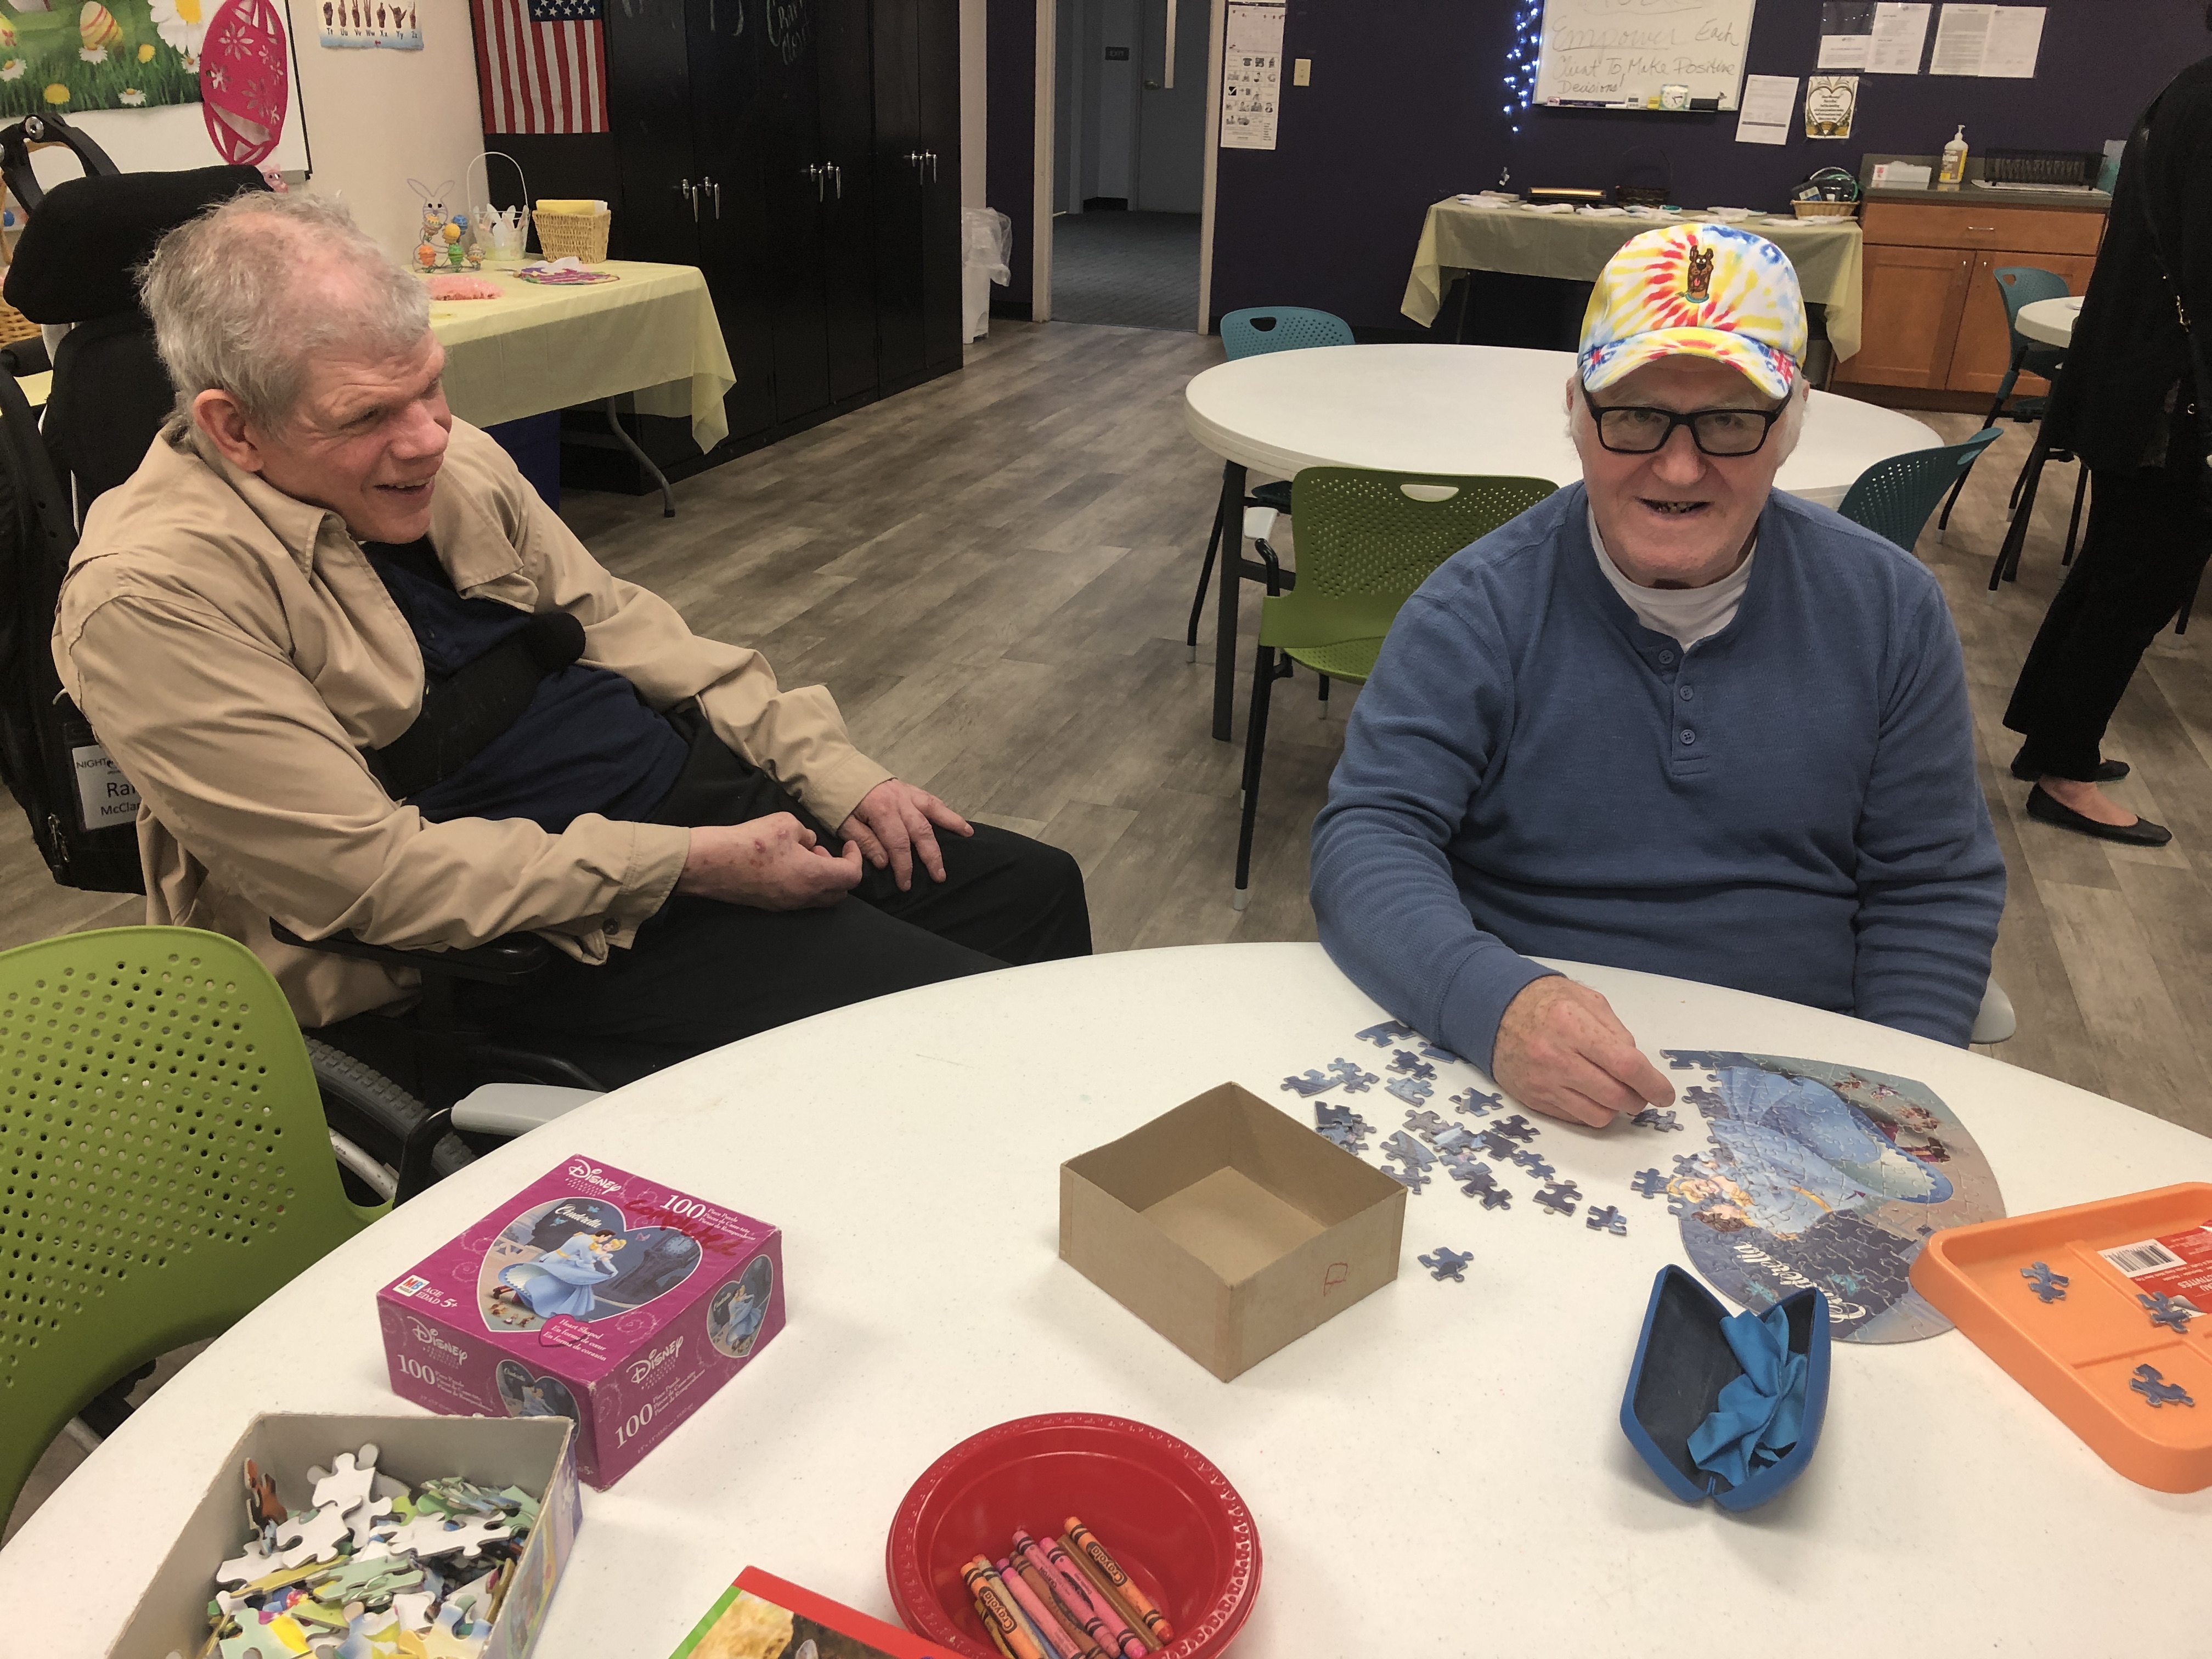 Two elderly men smile and do jigsaw puzzles at a round, white table